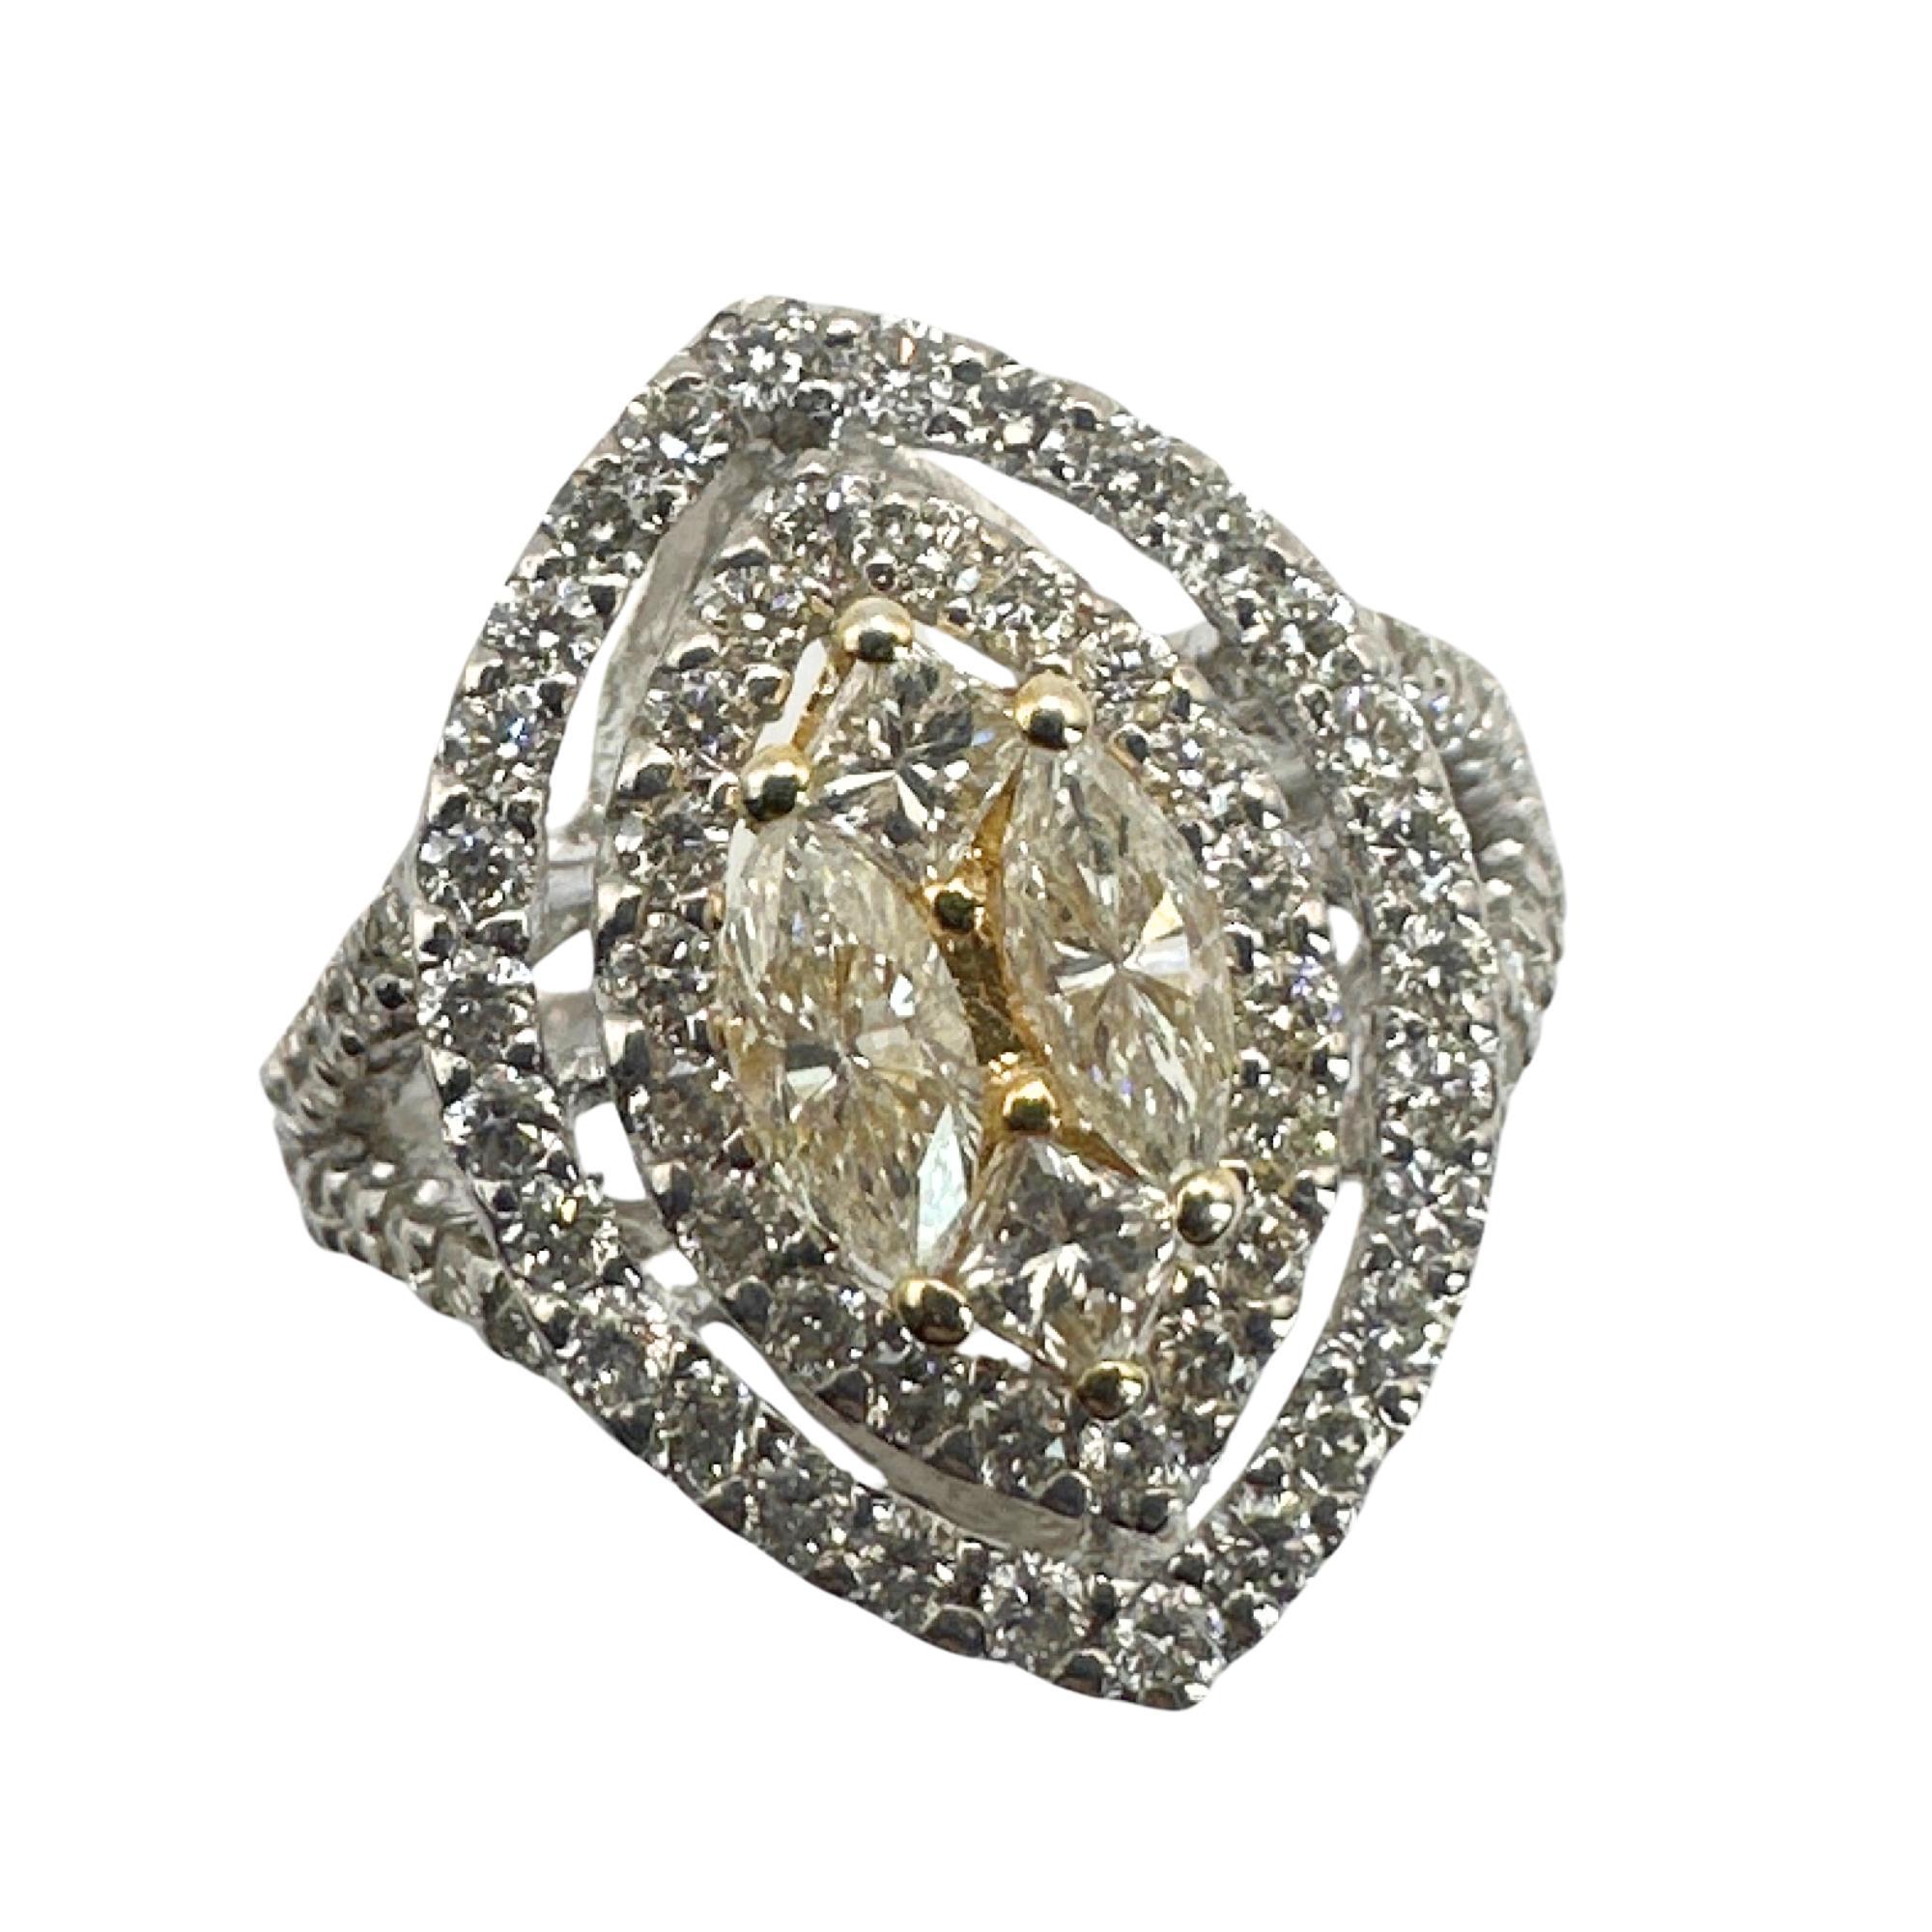 Introducing our 18k Marquise and Princess Cut Diamond Ring. Crafted from luxurious white and yellow gold, this elegant ring features a stunning combination of round, marquise, and princess cut diamonds, totaling 1.45 carats. In excellent condition